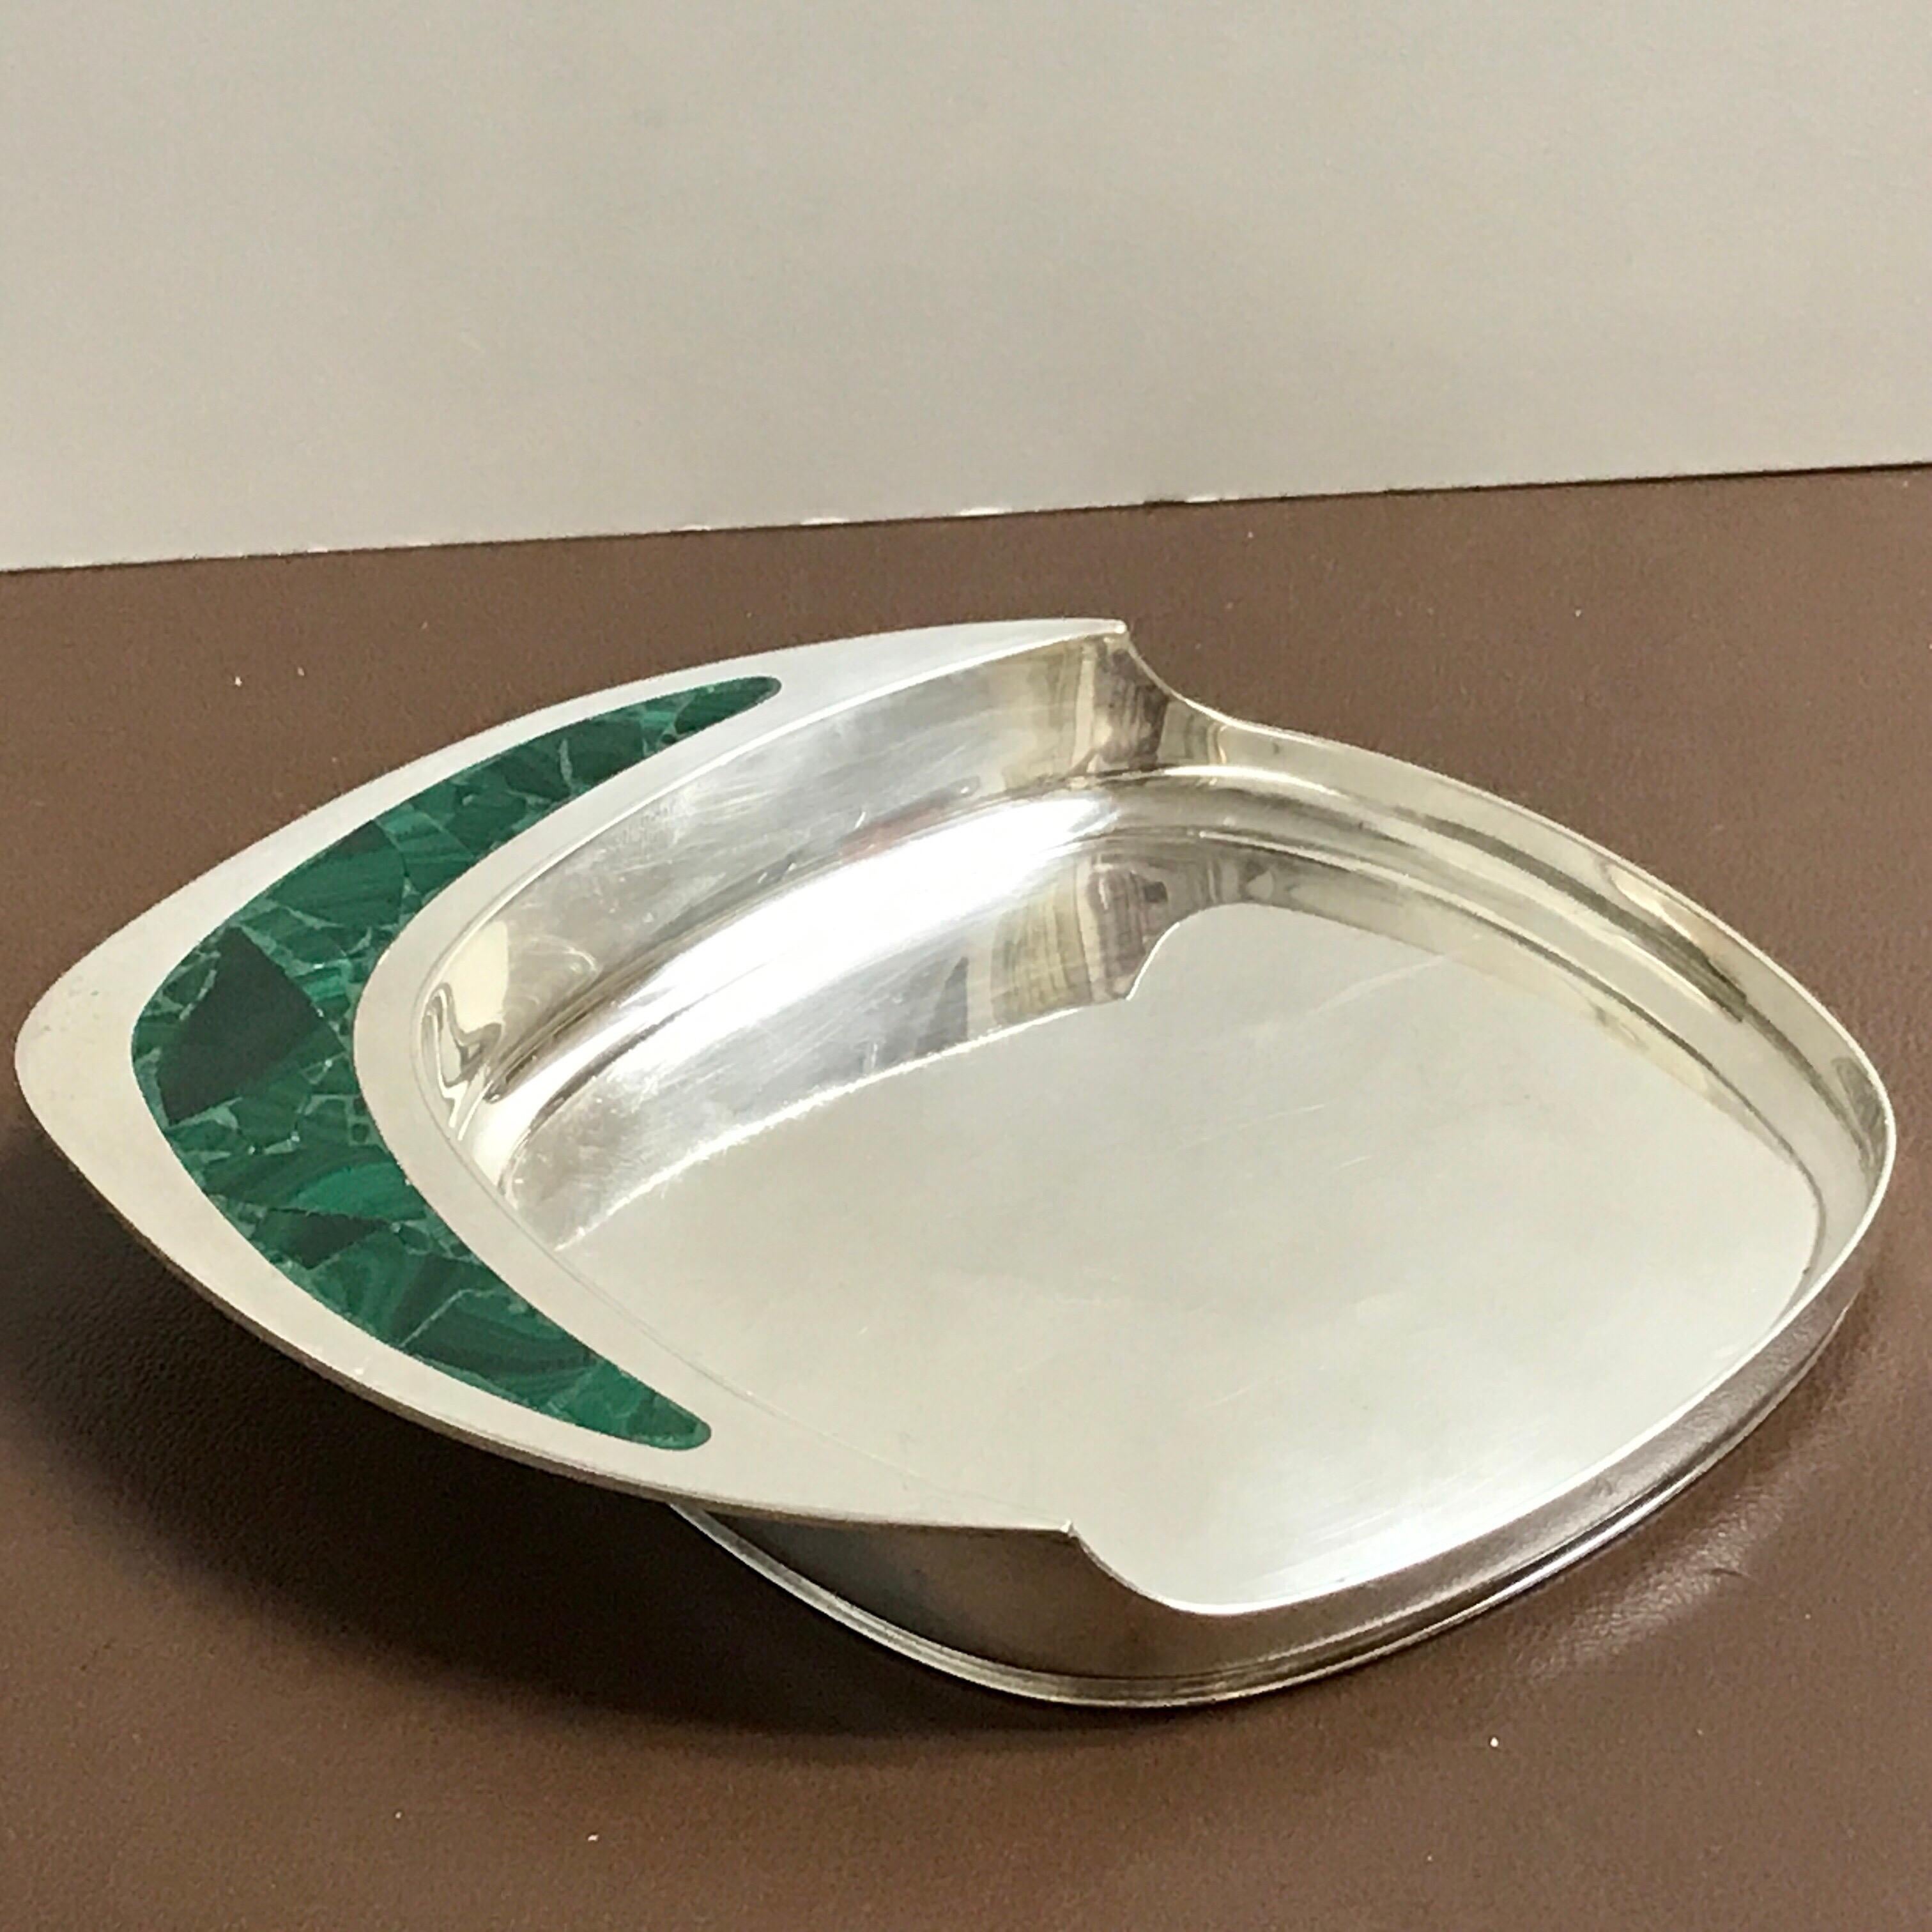 Midcentury Cartier sterling and malachite wine coaster, of triangular square (Dodecahedron) form with inset malachite handle, and a 5